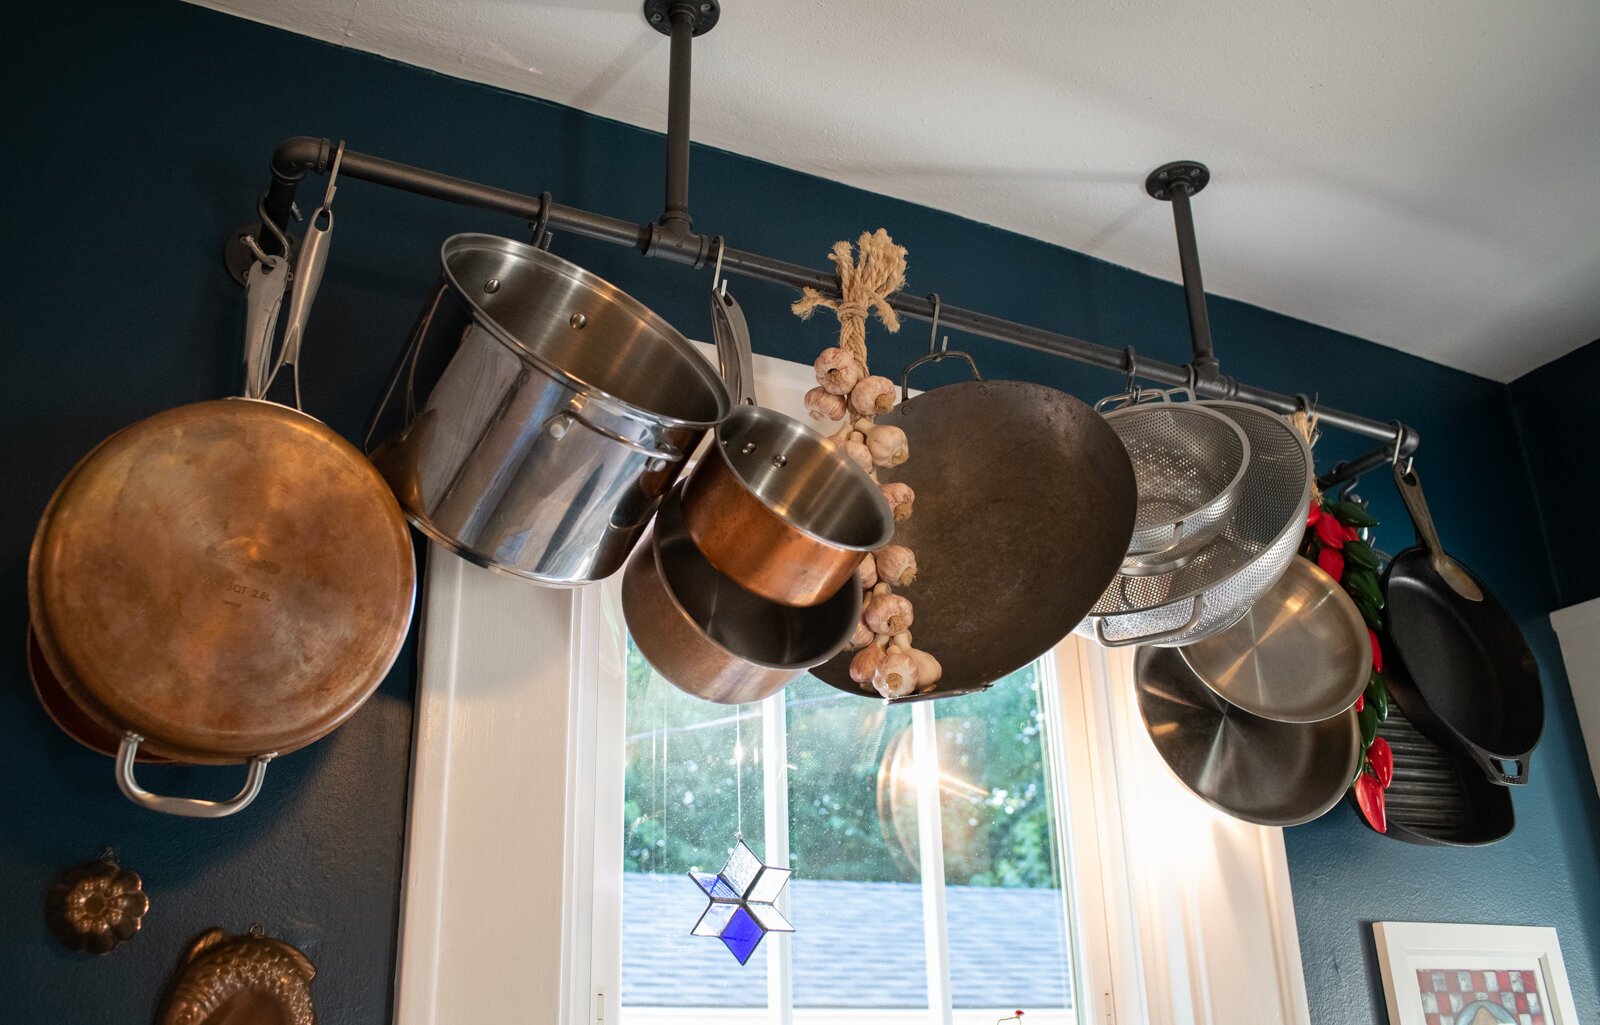 Hanging pots and pans maximizes space in a small kitchen.